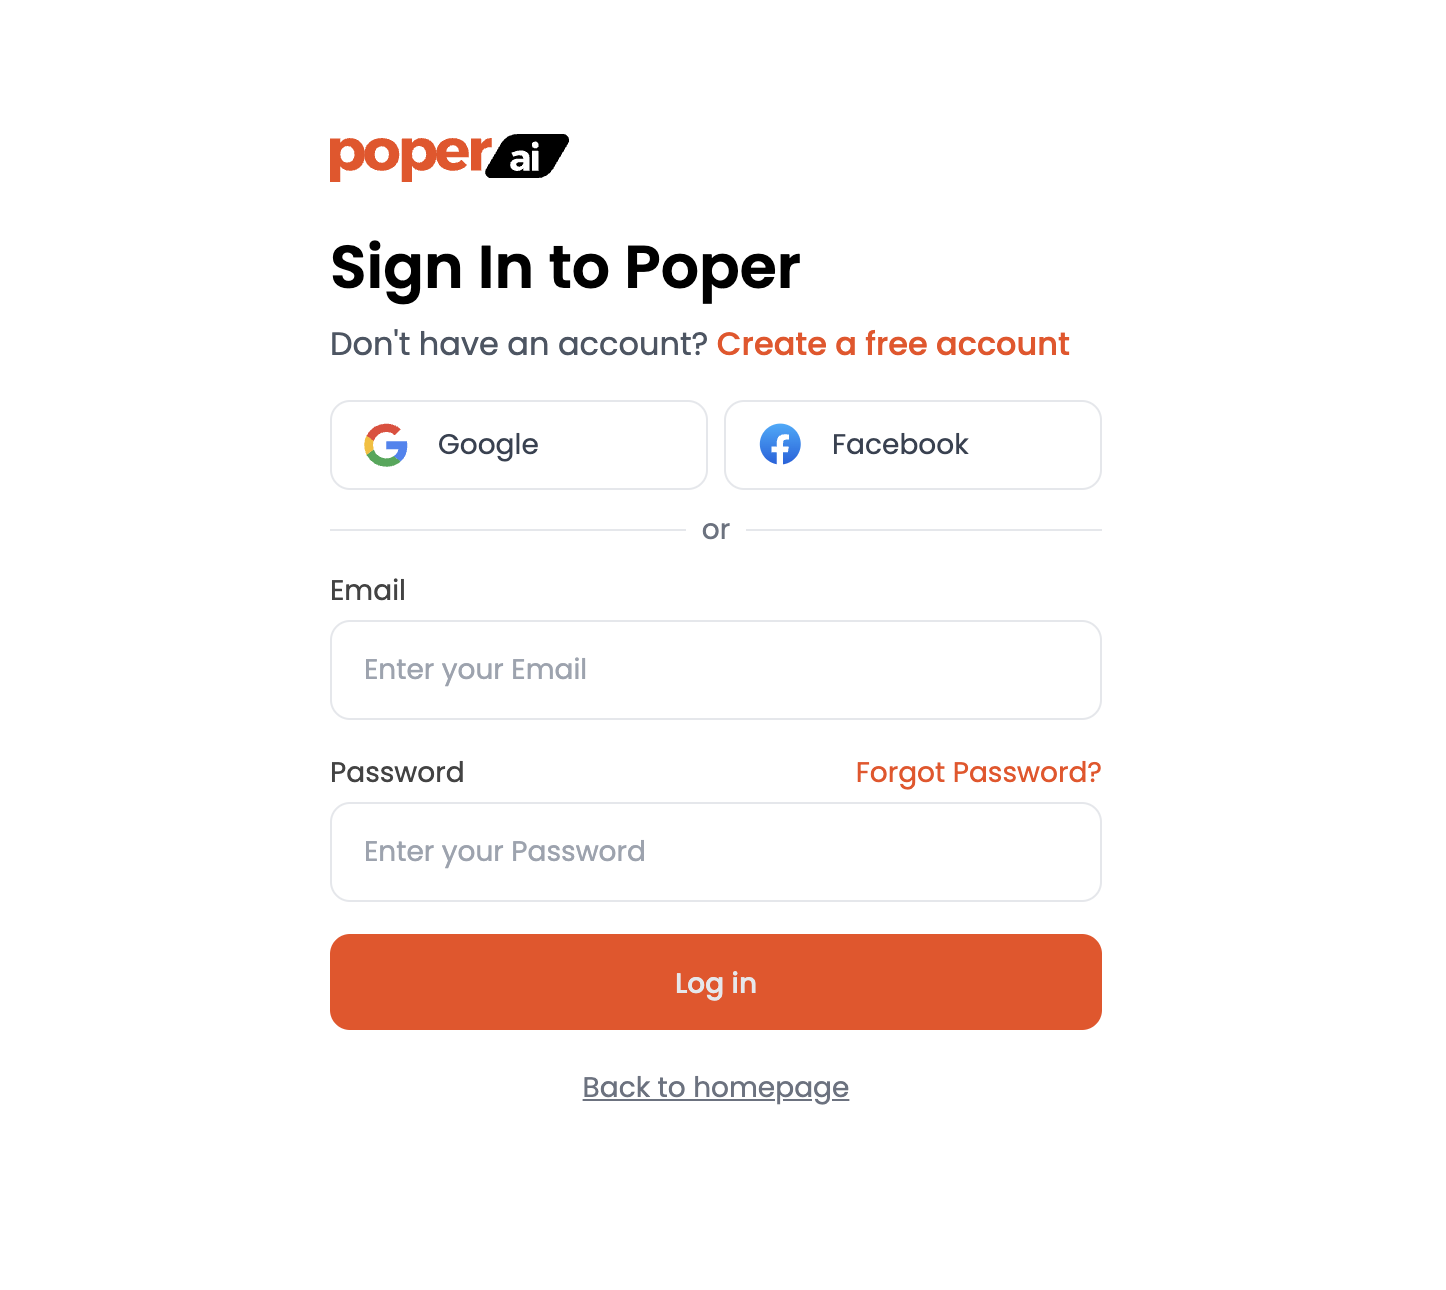 Log in to Your Poper Account